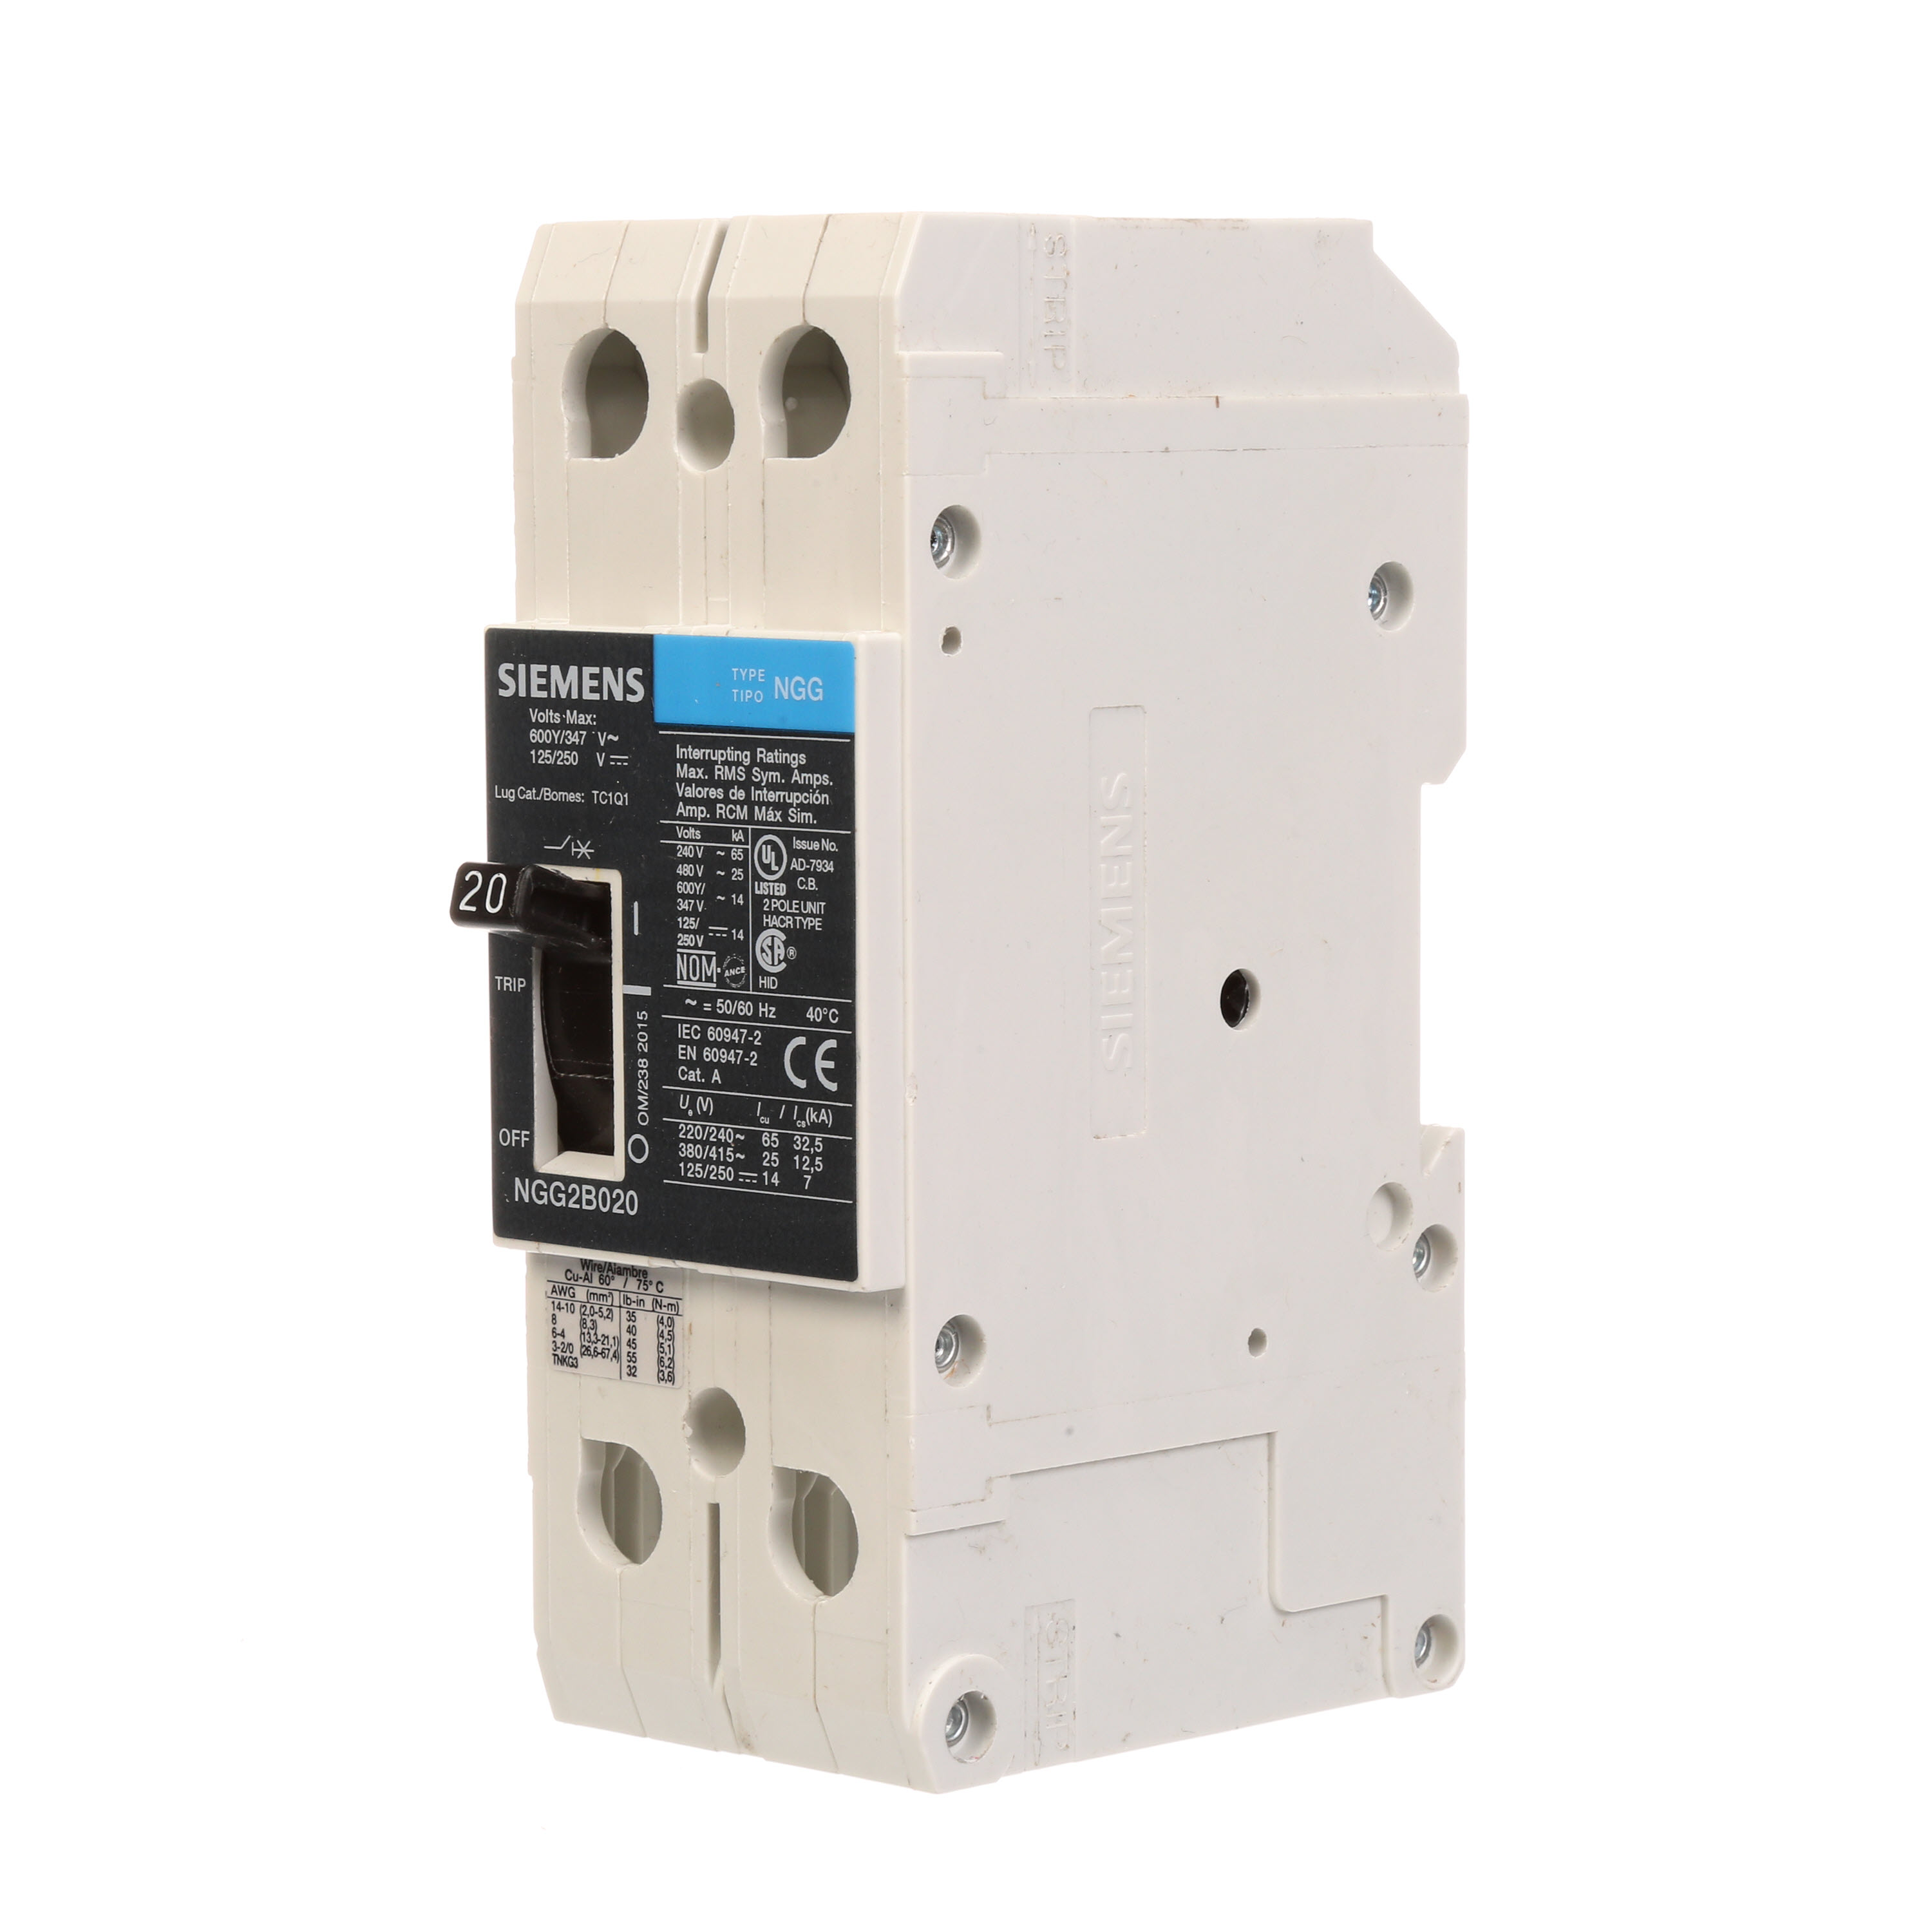 SIEMENS LOW VOLTAGE G FRAME CIRCUIT BREAKER WITH THERMAL - MAGNETIC TRIP. UL LISTED NGG FRAME WITH STANDARD BREAKING CAPACITY. 20A 2-POLE (14KAIC AT 600Y/347V)(25KAIC AT 480V). SPECIAL FEATURES MOUNTS ON DIN RAIL / SCREW, NO LUGS. DIMENSIONS (W x H x D) IN 2 x 5.4 x 2.8.